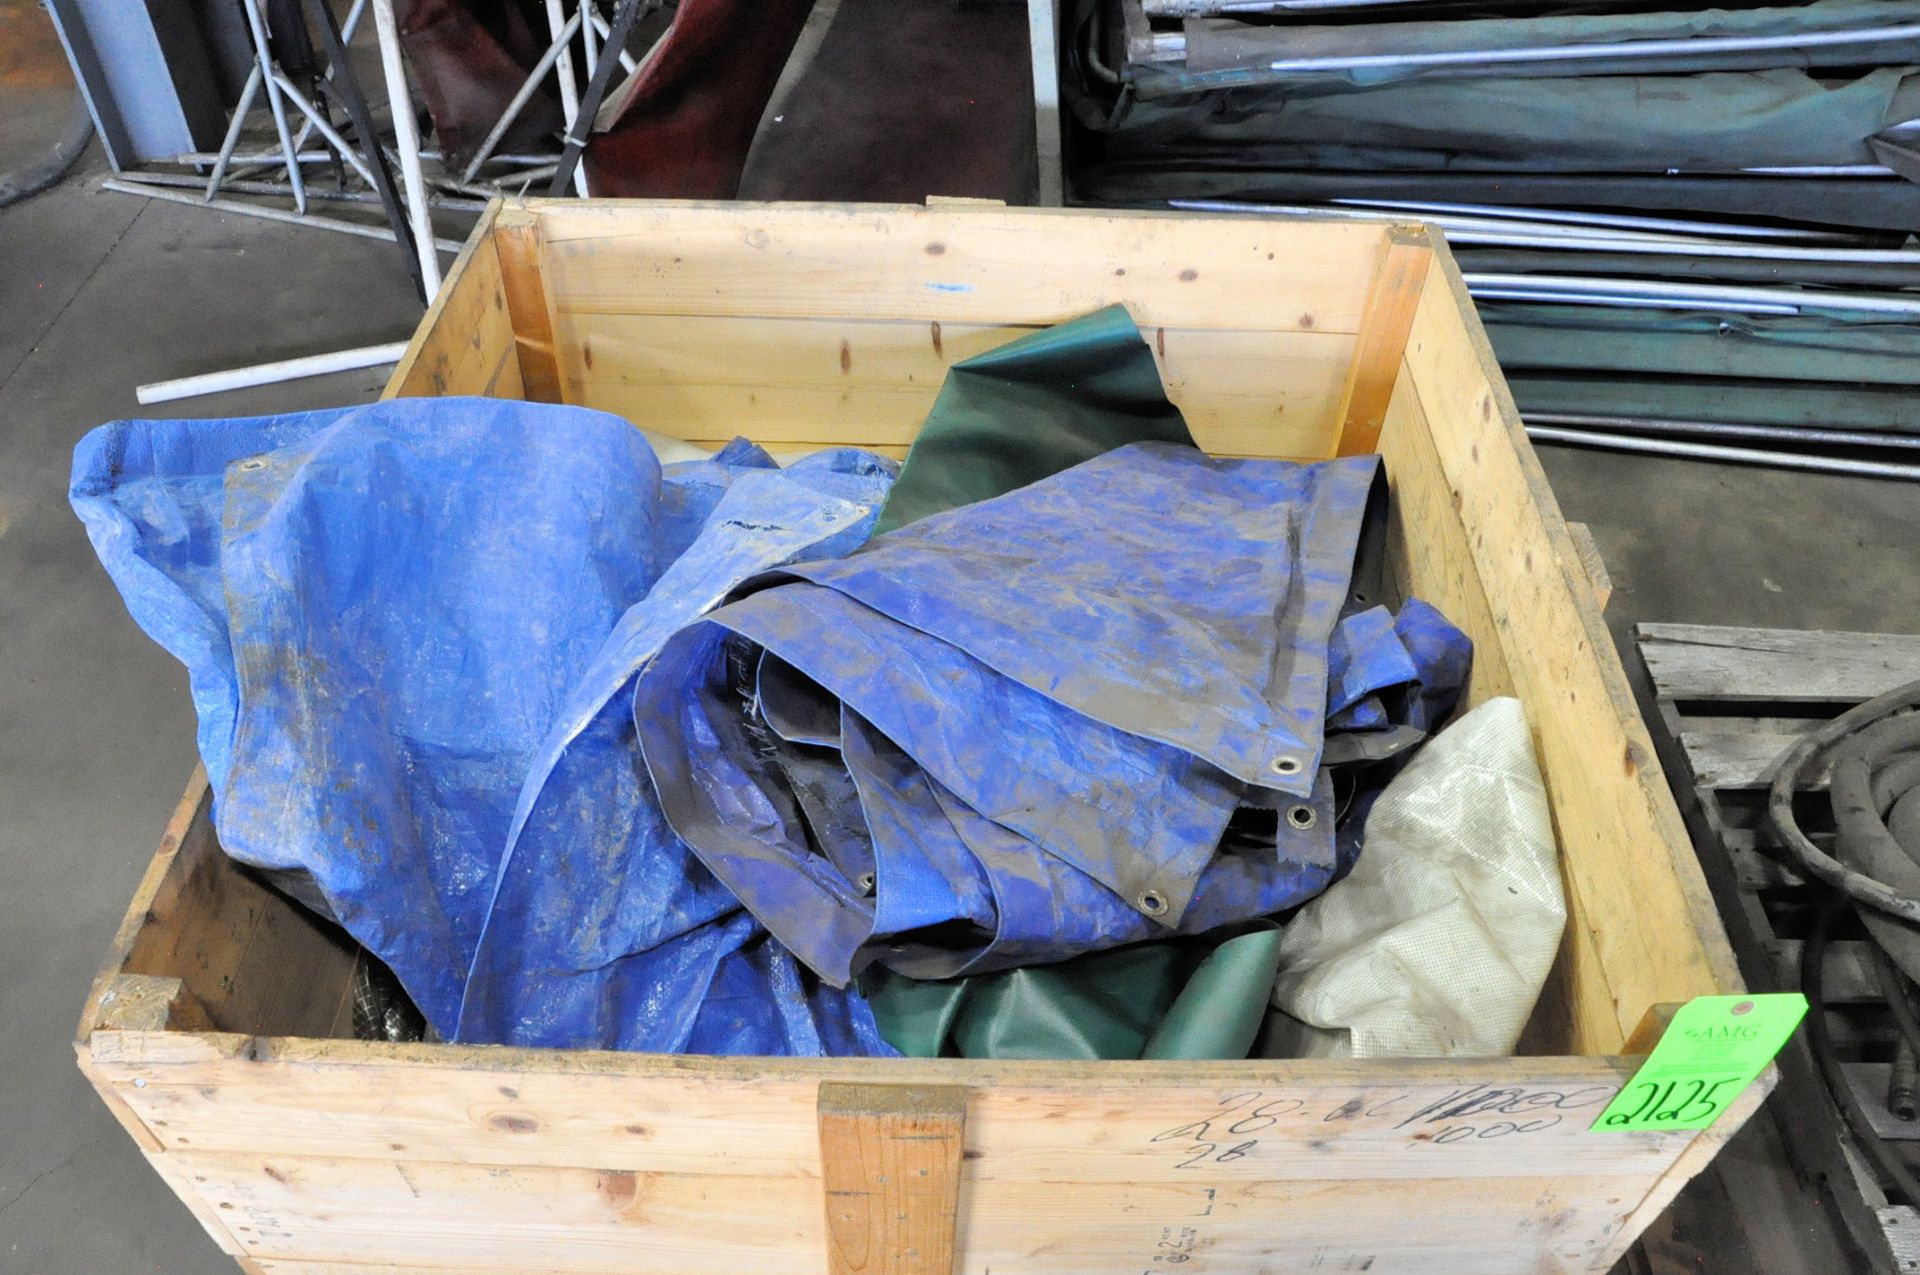 Lot-Unisorb Product, Hoses and Tarps in (2) Crates and (1) Pallet, (F-21), (Green Tag) - Image 3 of 3